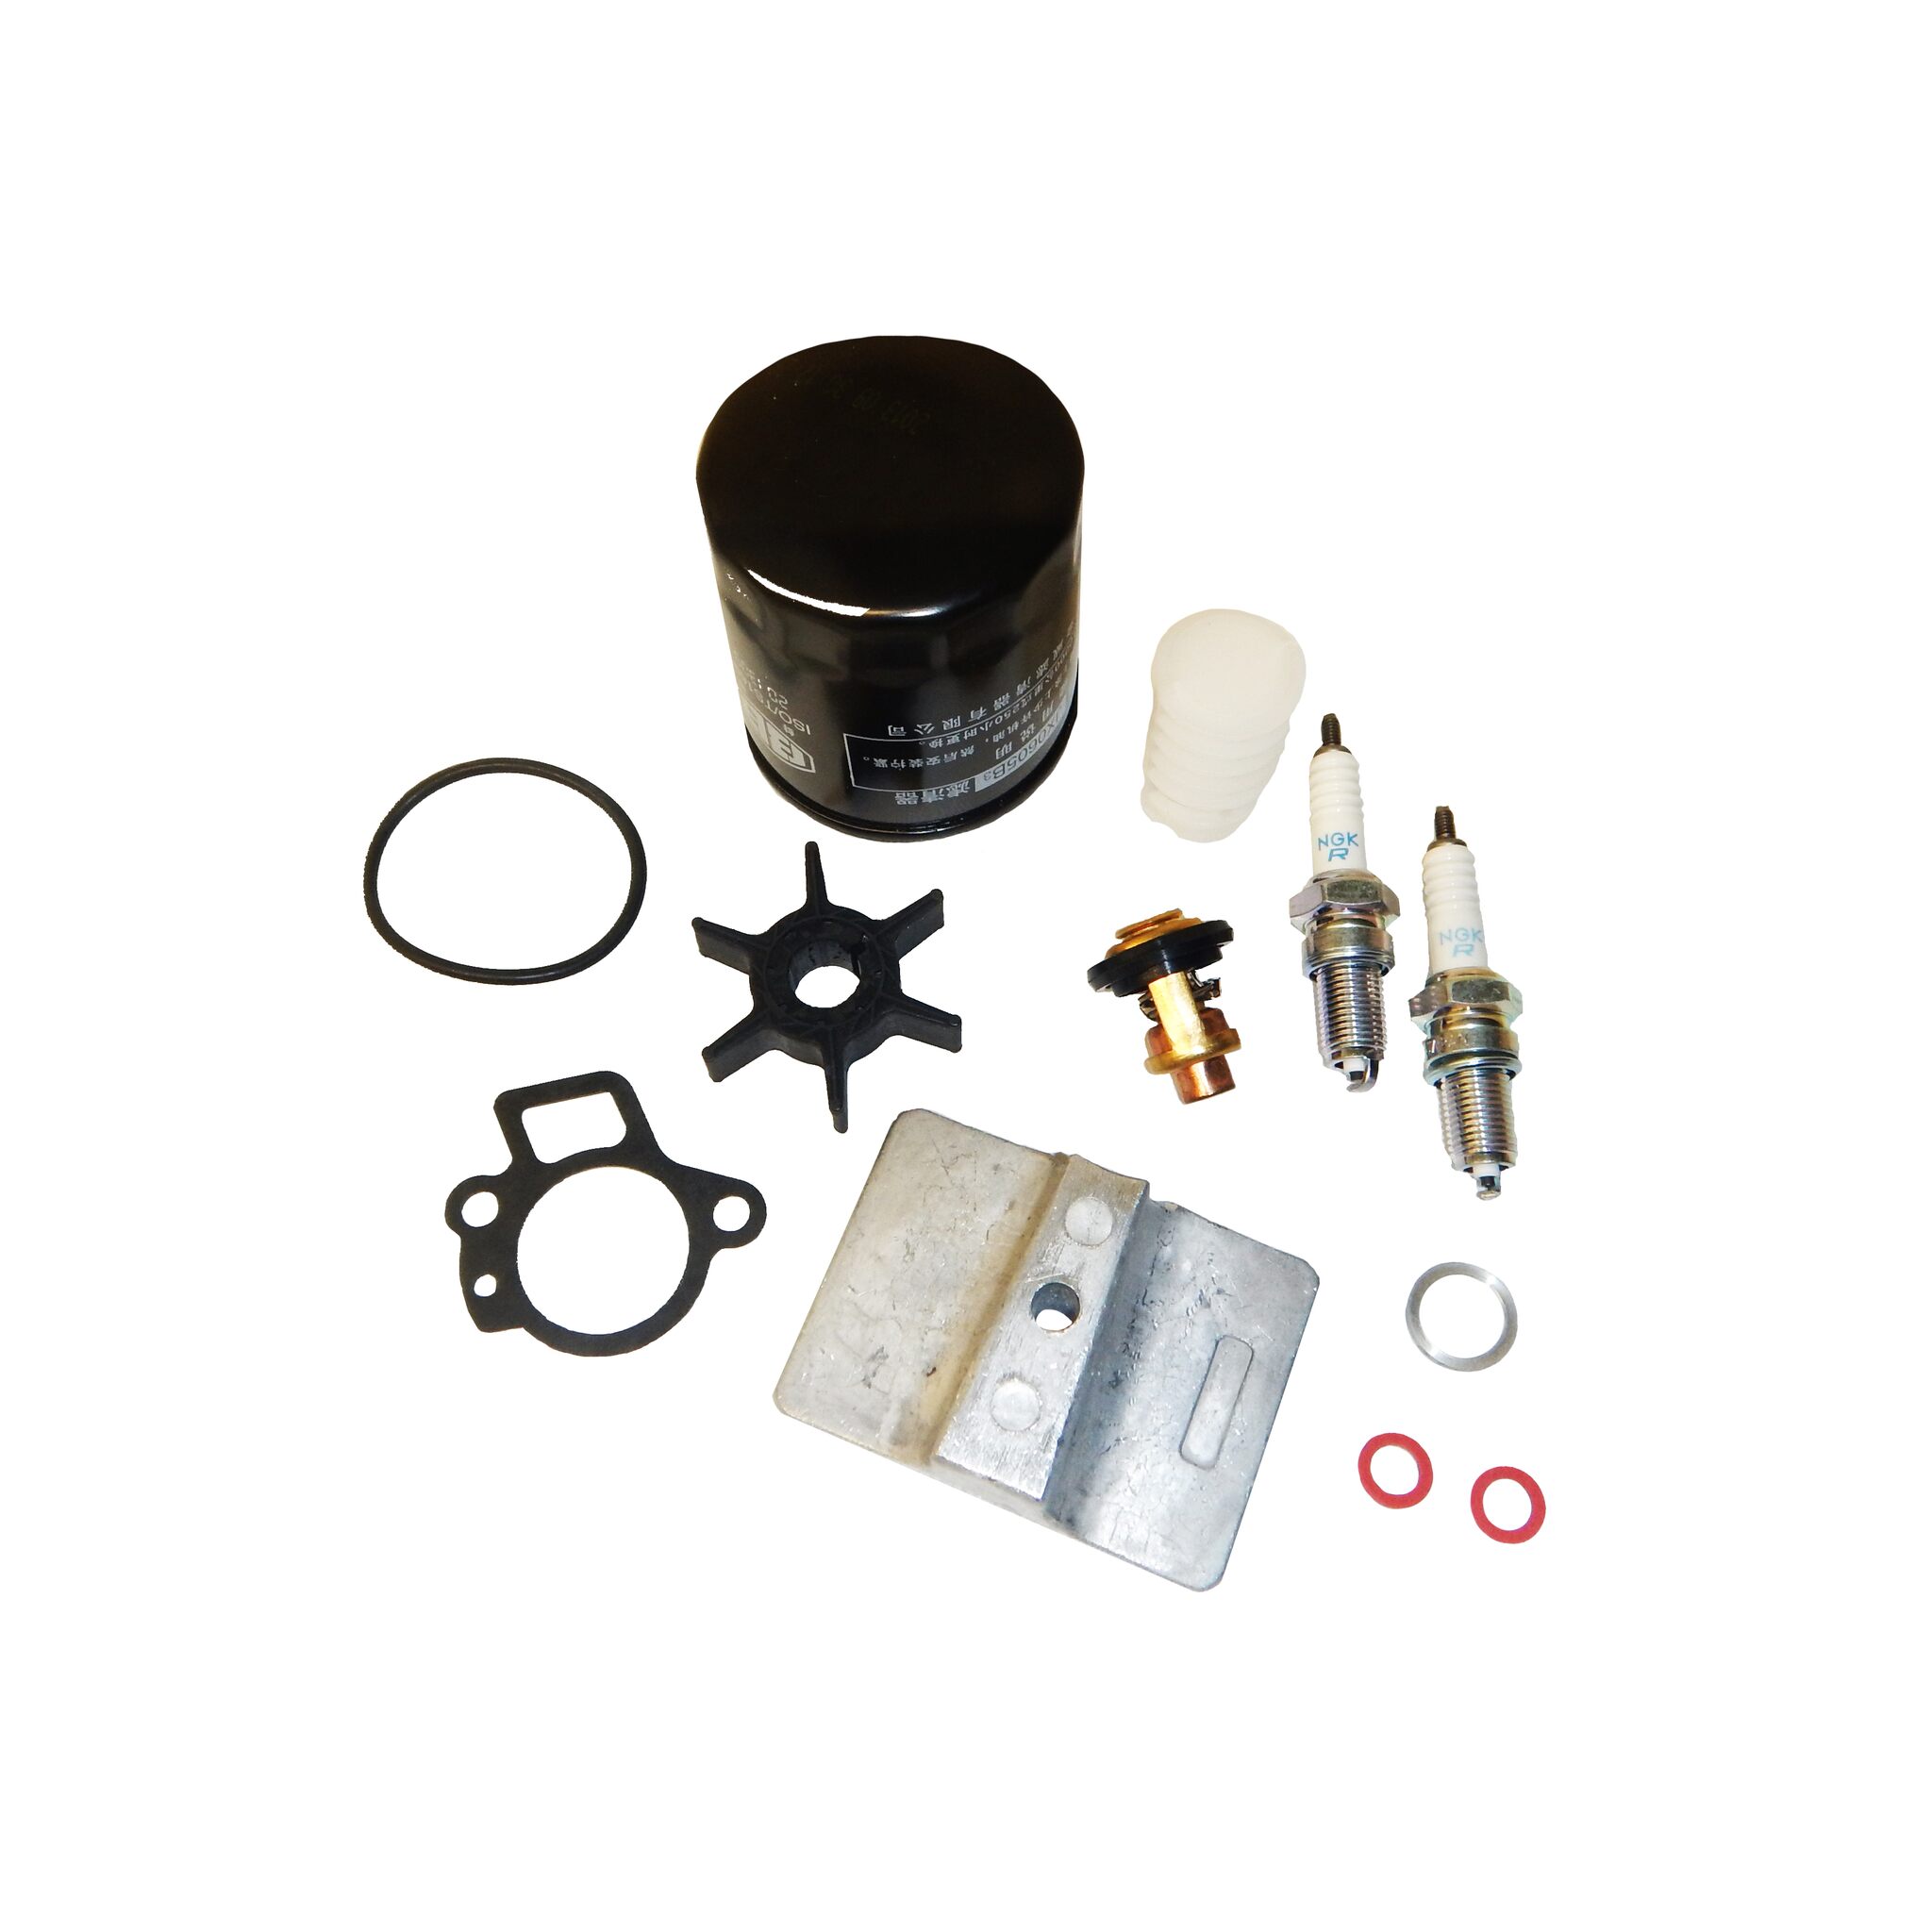 Maintenance kit for OceanCraft outboards